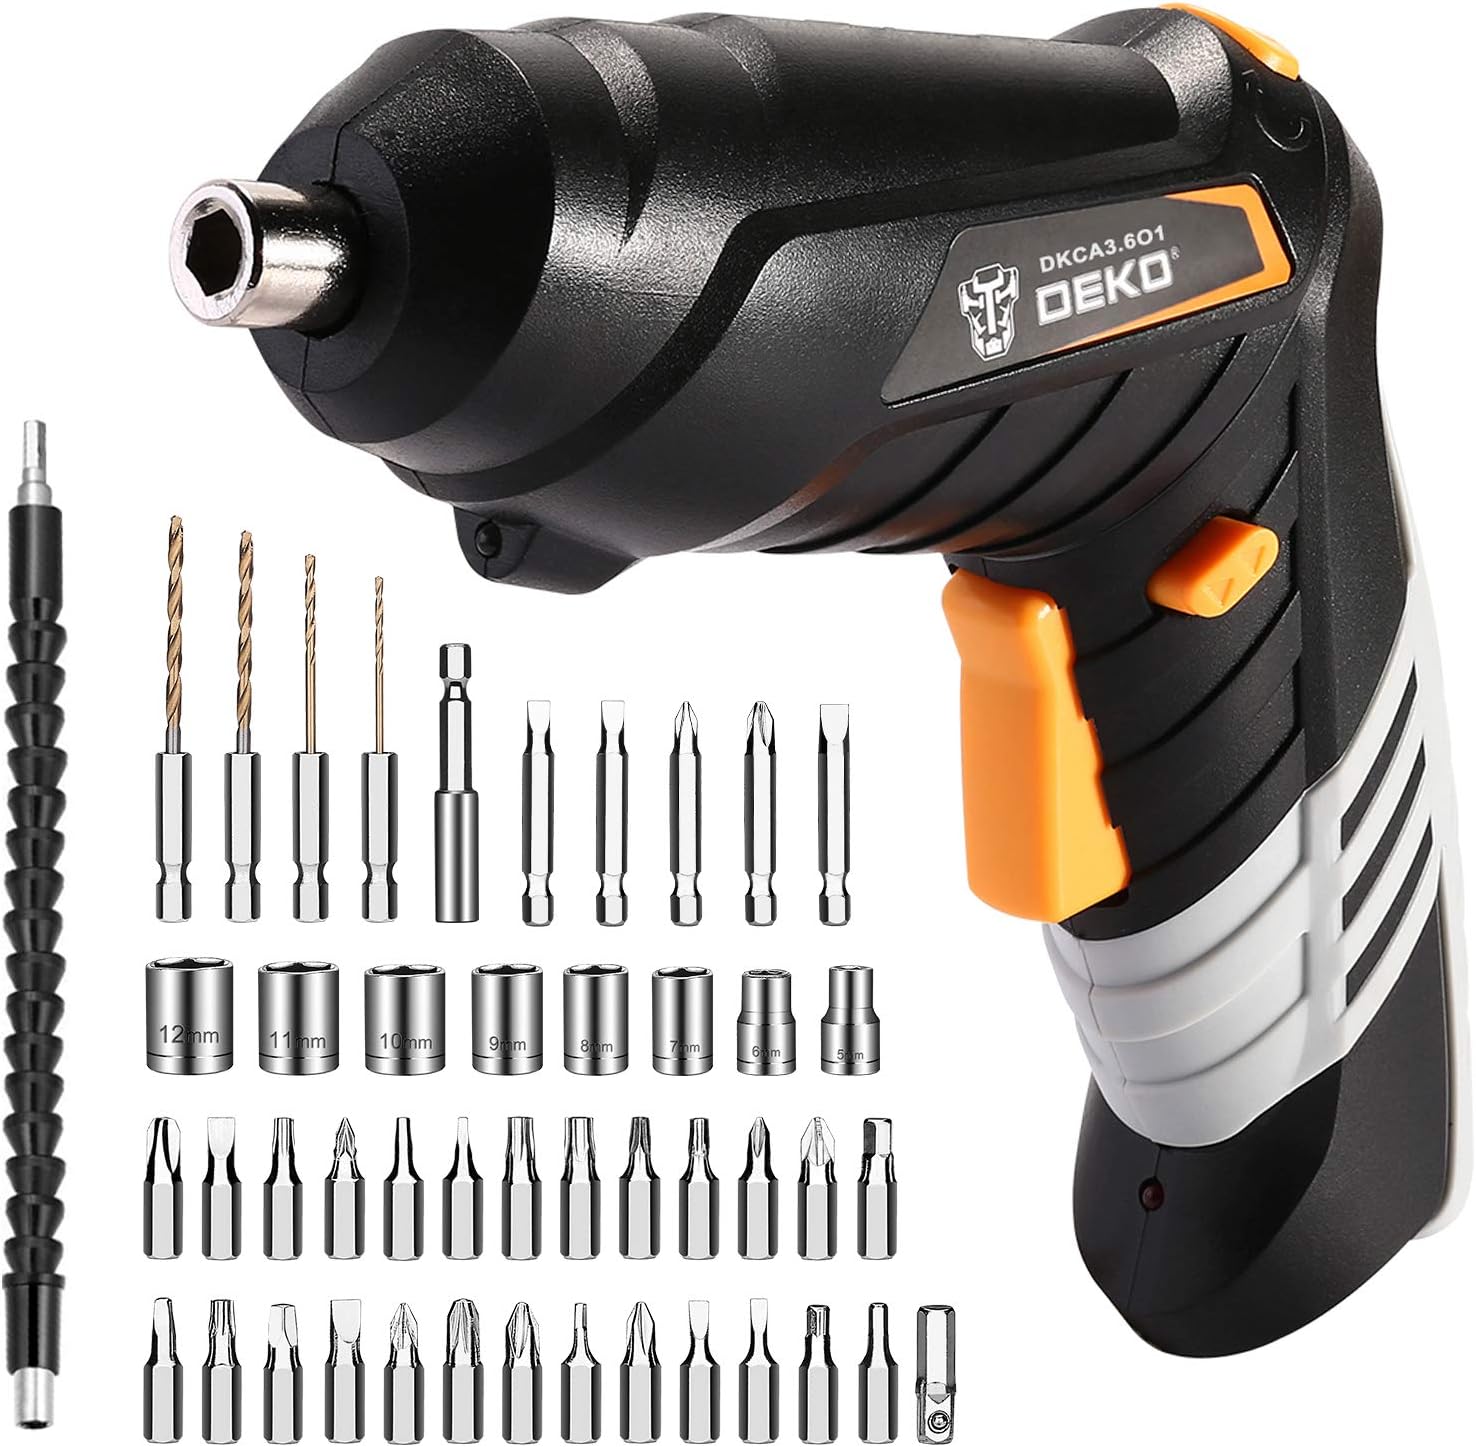 DEKOPRO Cordless Screwdriver, 3.6V Electric Screwdriver Household Battery Rechargeable Drill Driver Power, 47pcs Accessories, Adjustabl